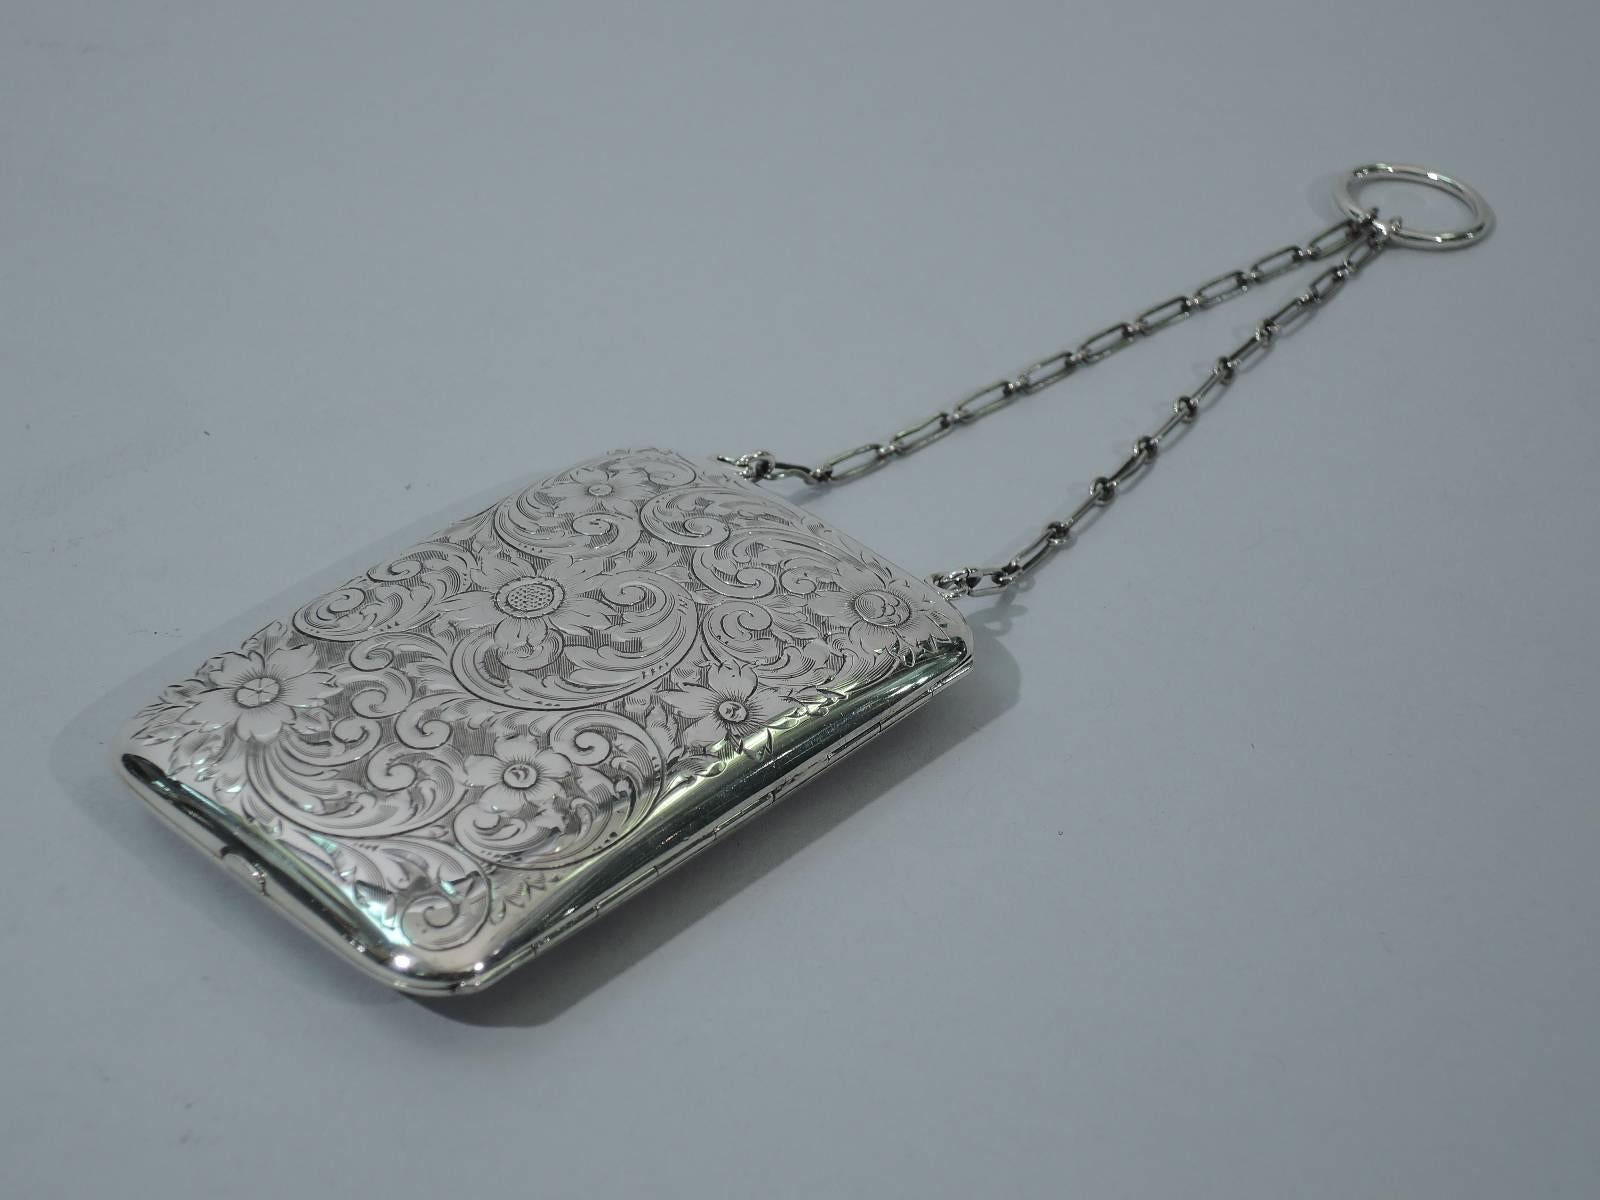 Sterling silver lady’s compact purse. Made by Theodore W. Foster (formerly Foster & Bailey) in Providence, circa 1910. Rectangular and hinged. all-over acid-etched scrolls and flowers. Compact interior with three compartments. With wrist chain and